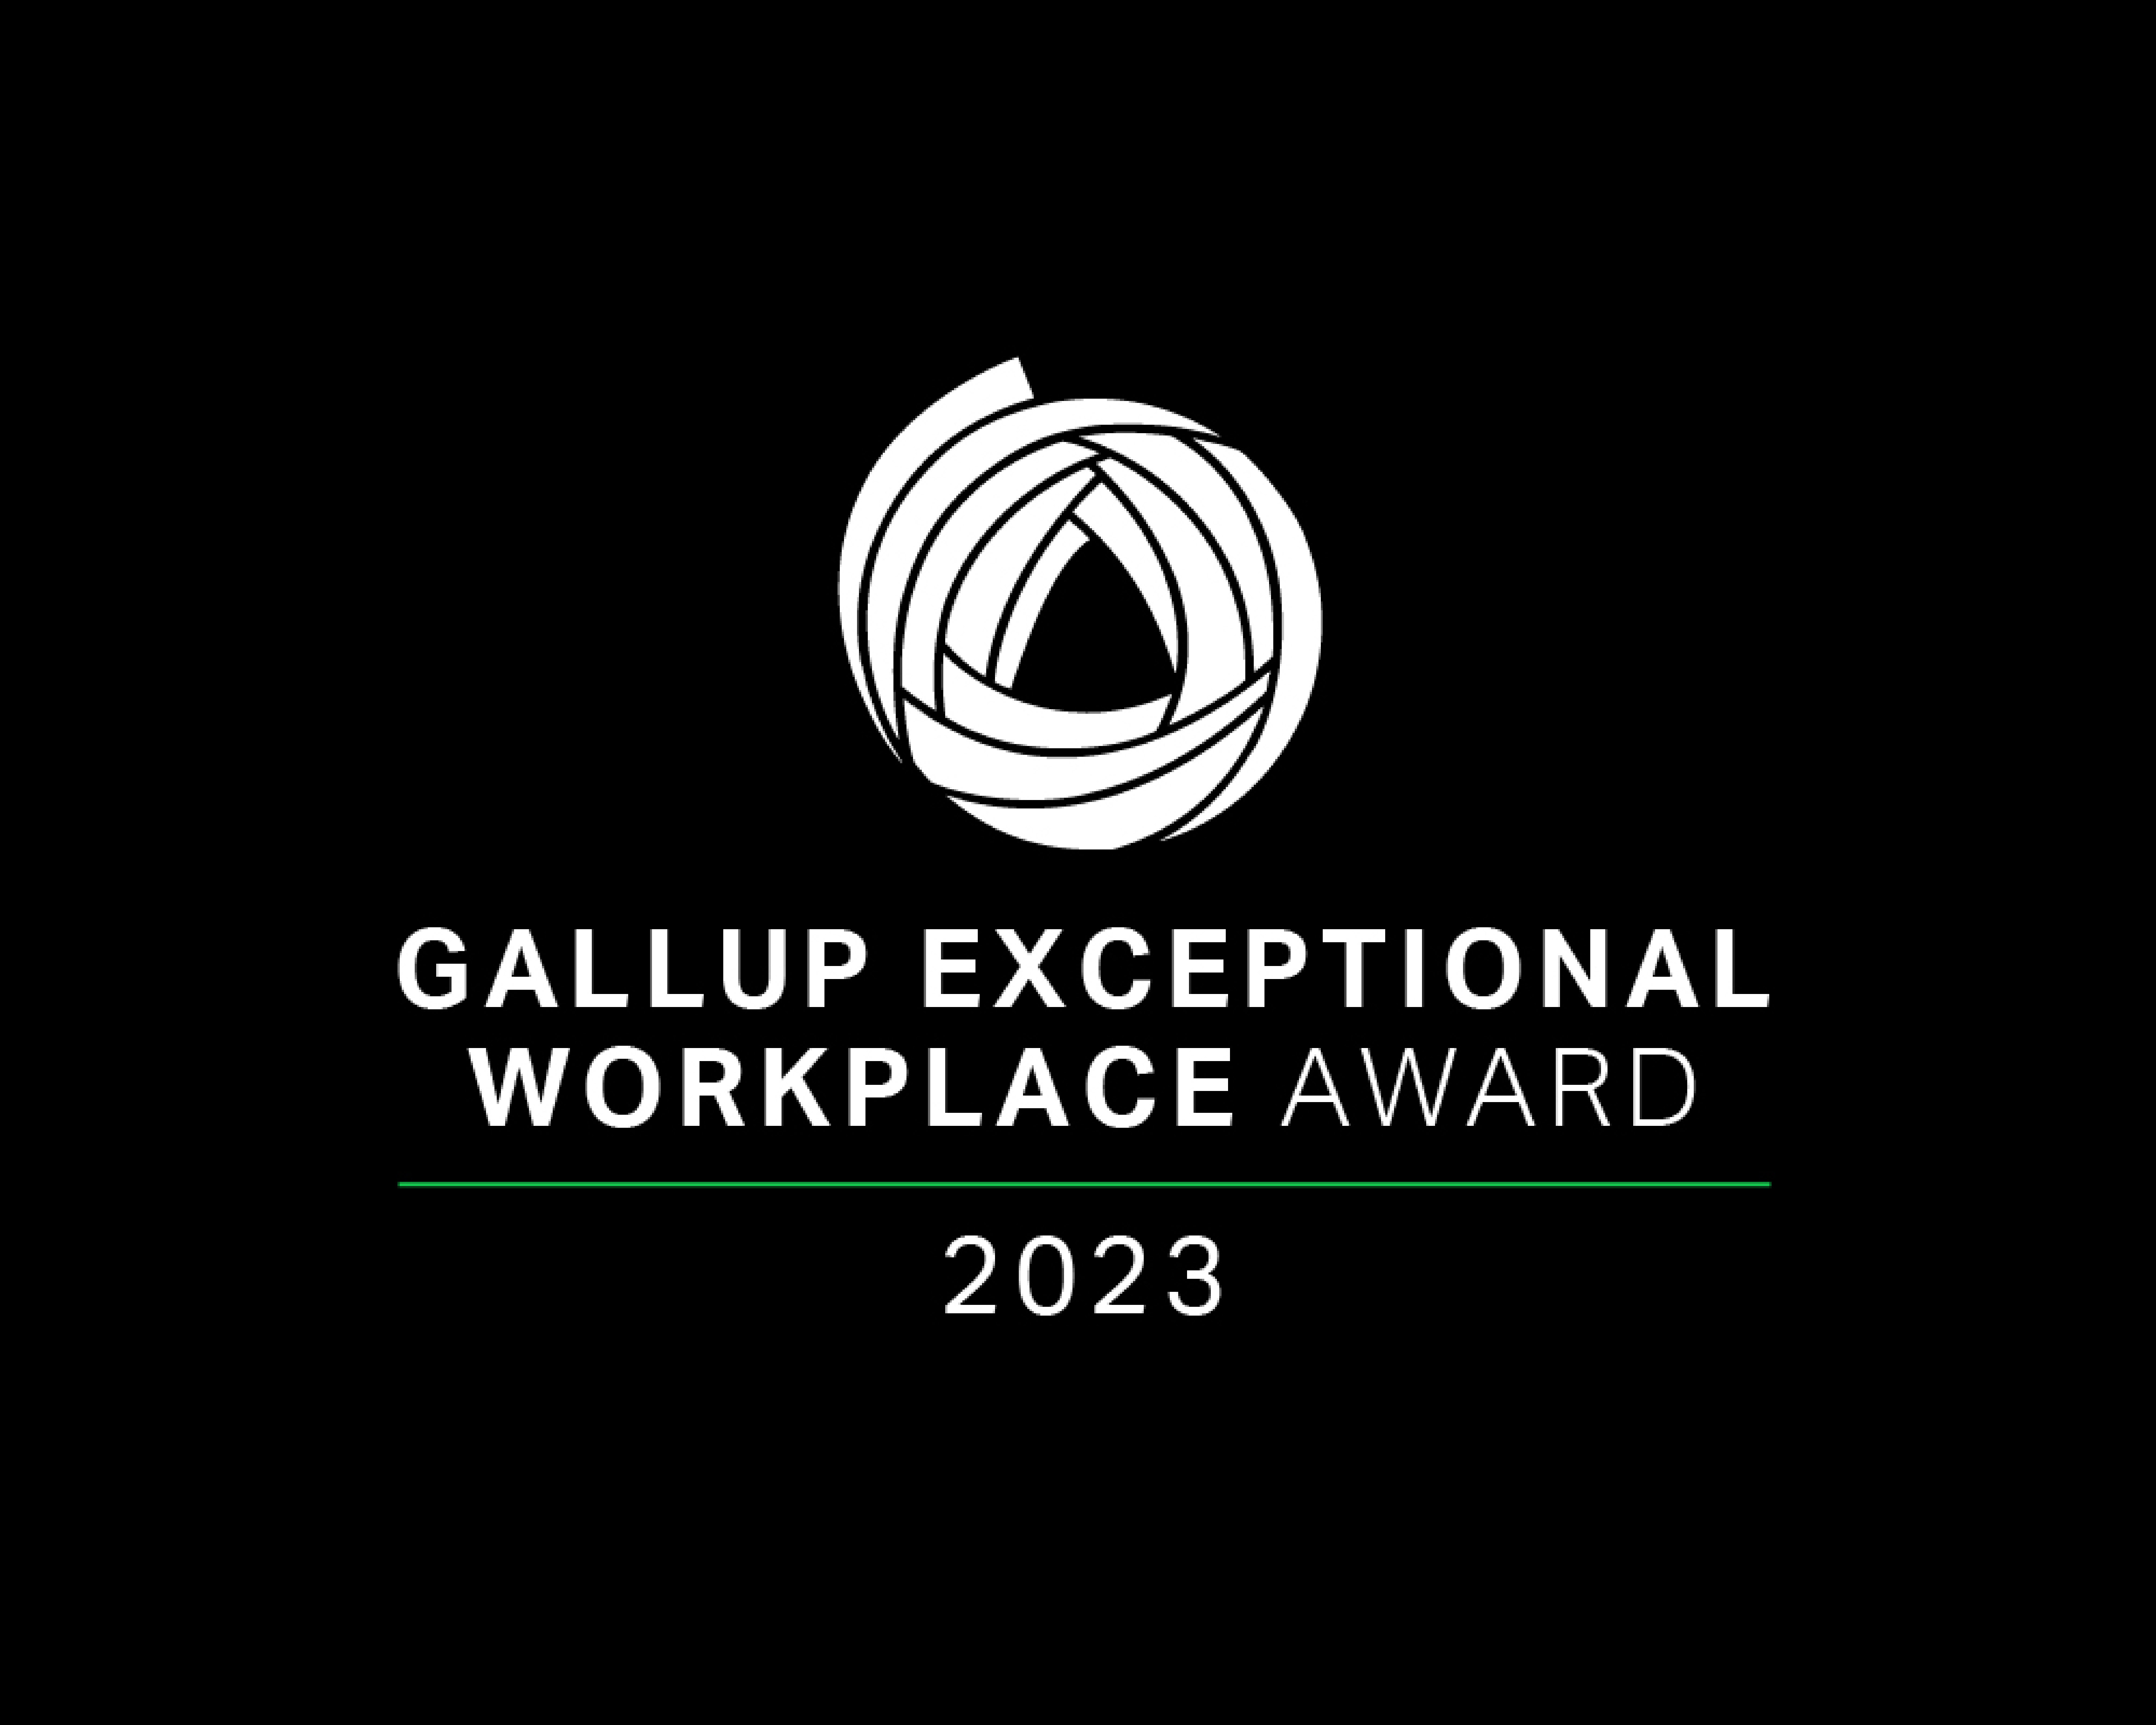 Virginia Credit Union Named 2023 Gallup Exceptional Workplace Award